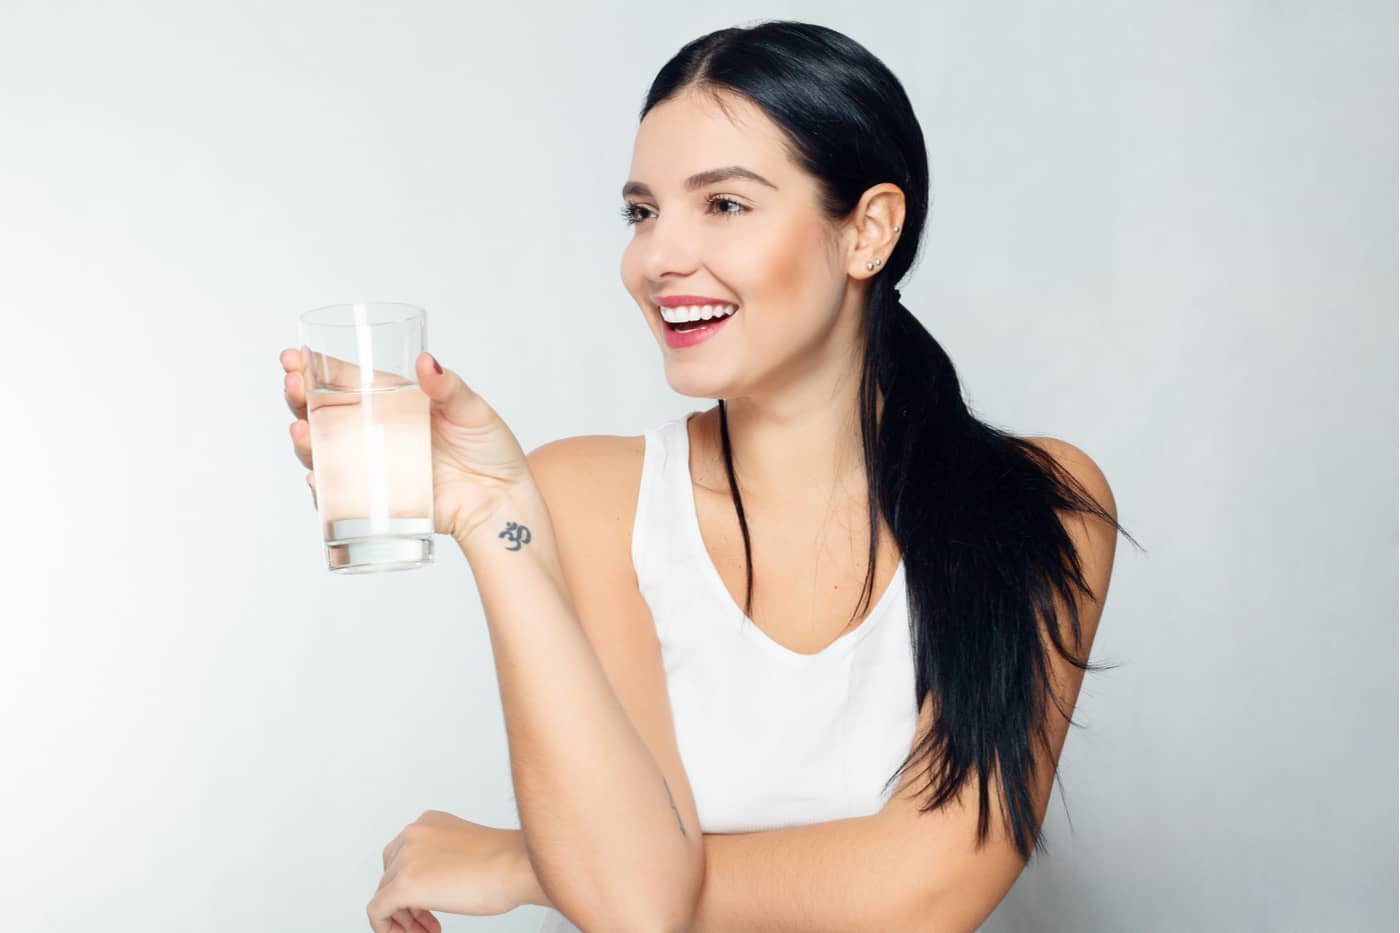 How much water should I drink on keto